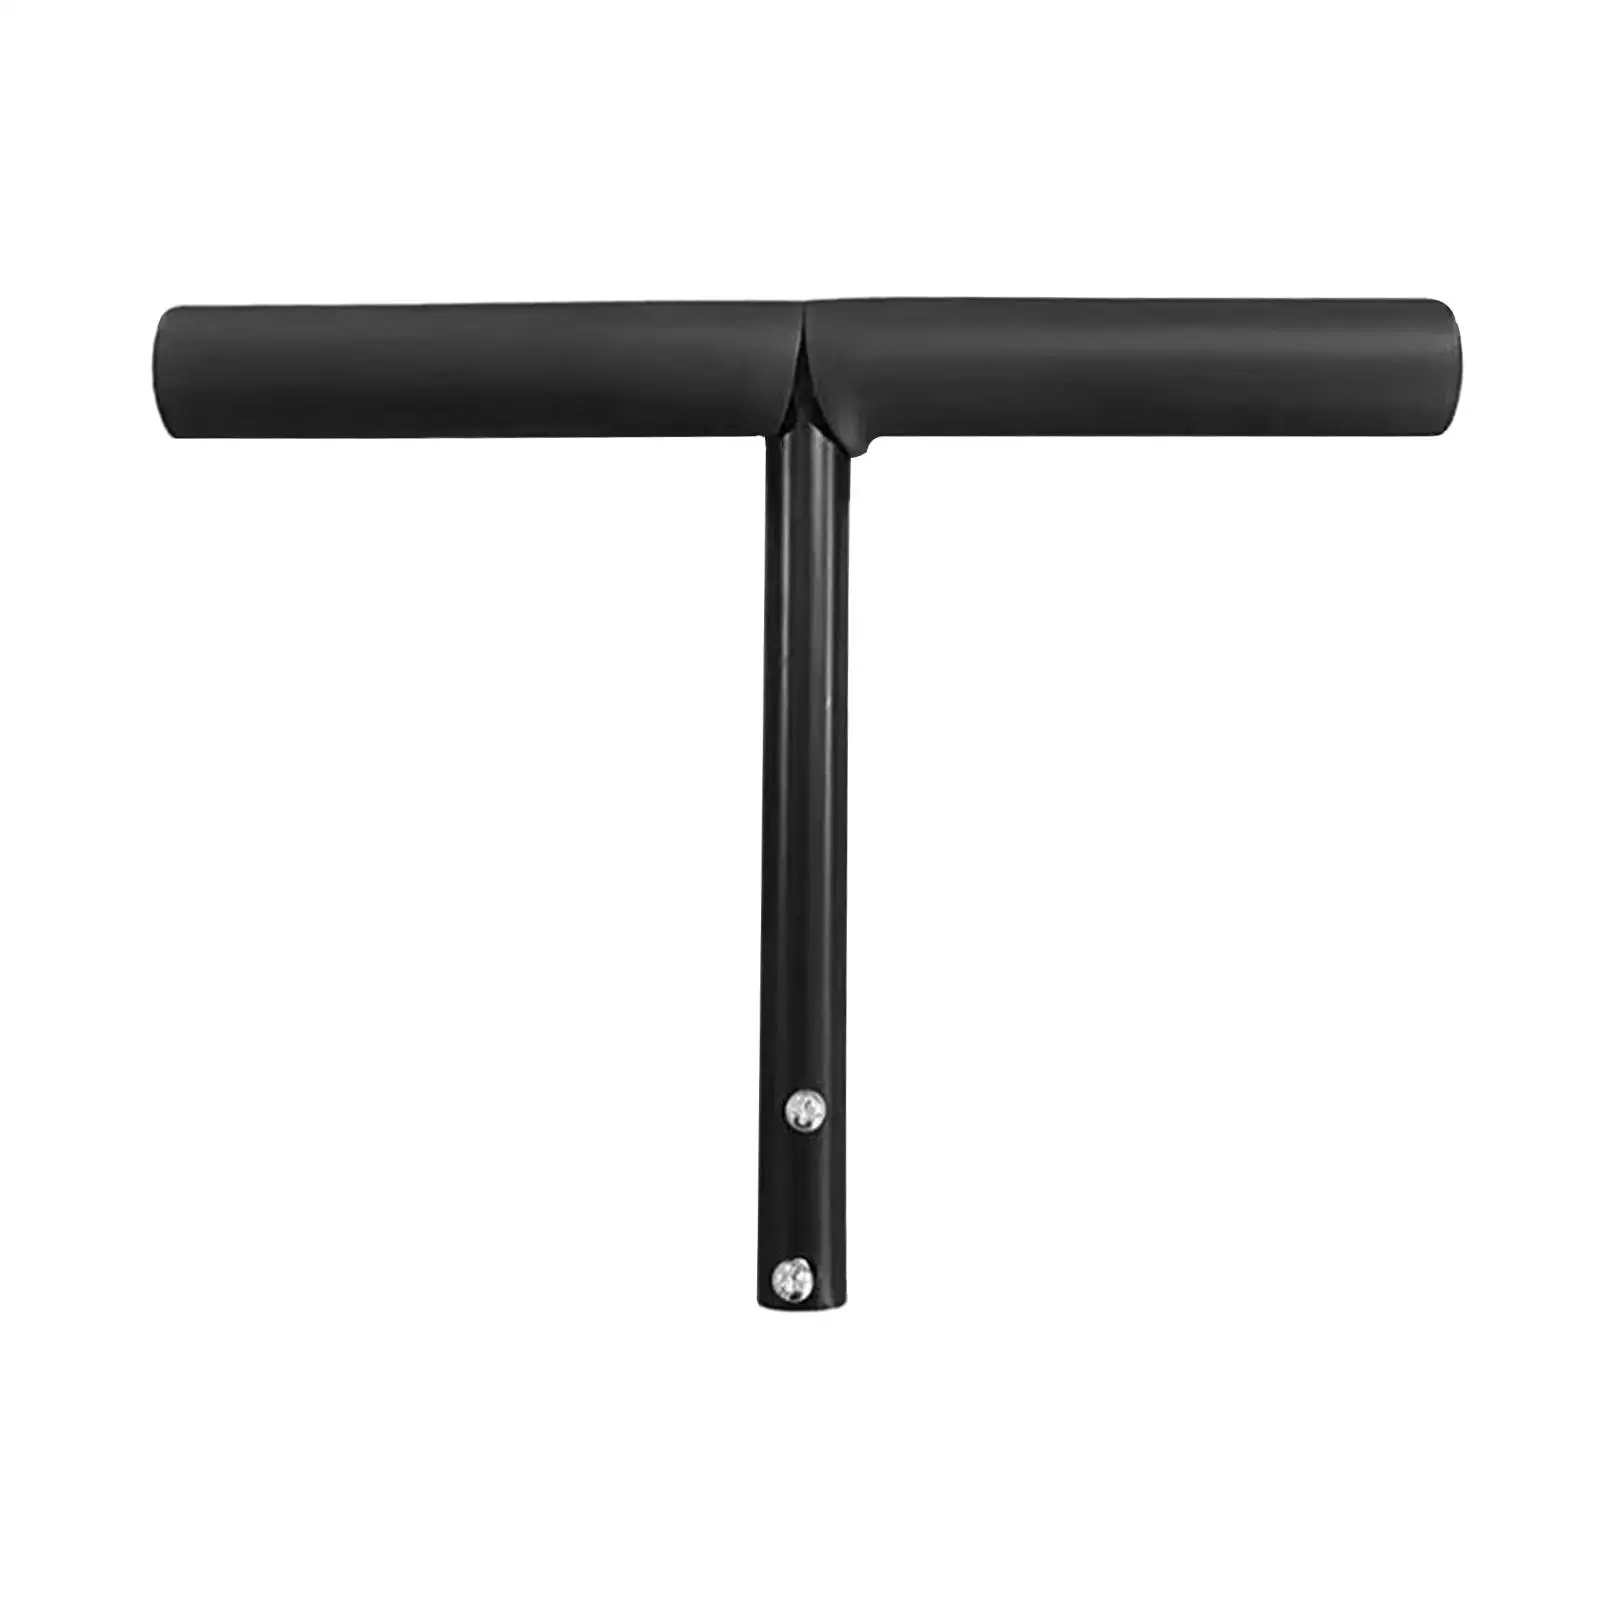 T Shaped Push Handle Bar Practical Sturdy Durable for Home Outdoor Travel